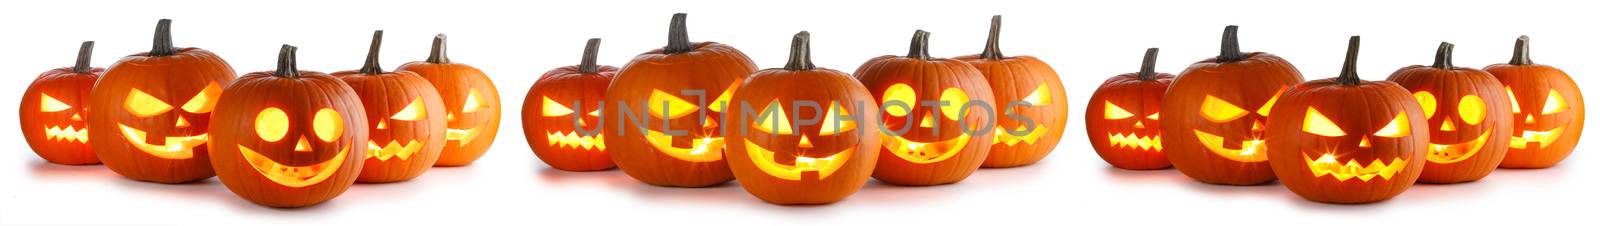 Halloween Pumpkins isolated on white by Yellowj